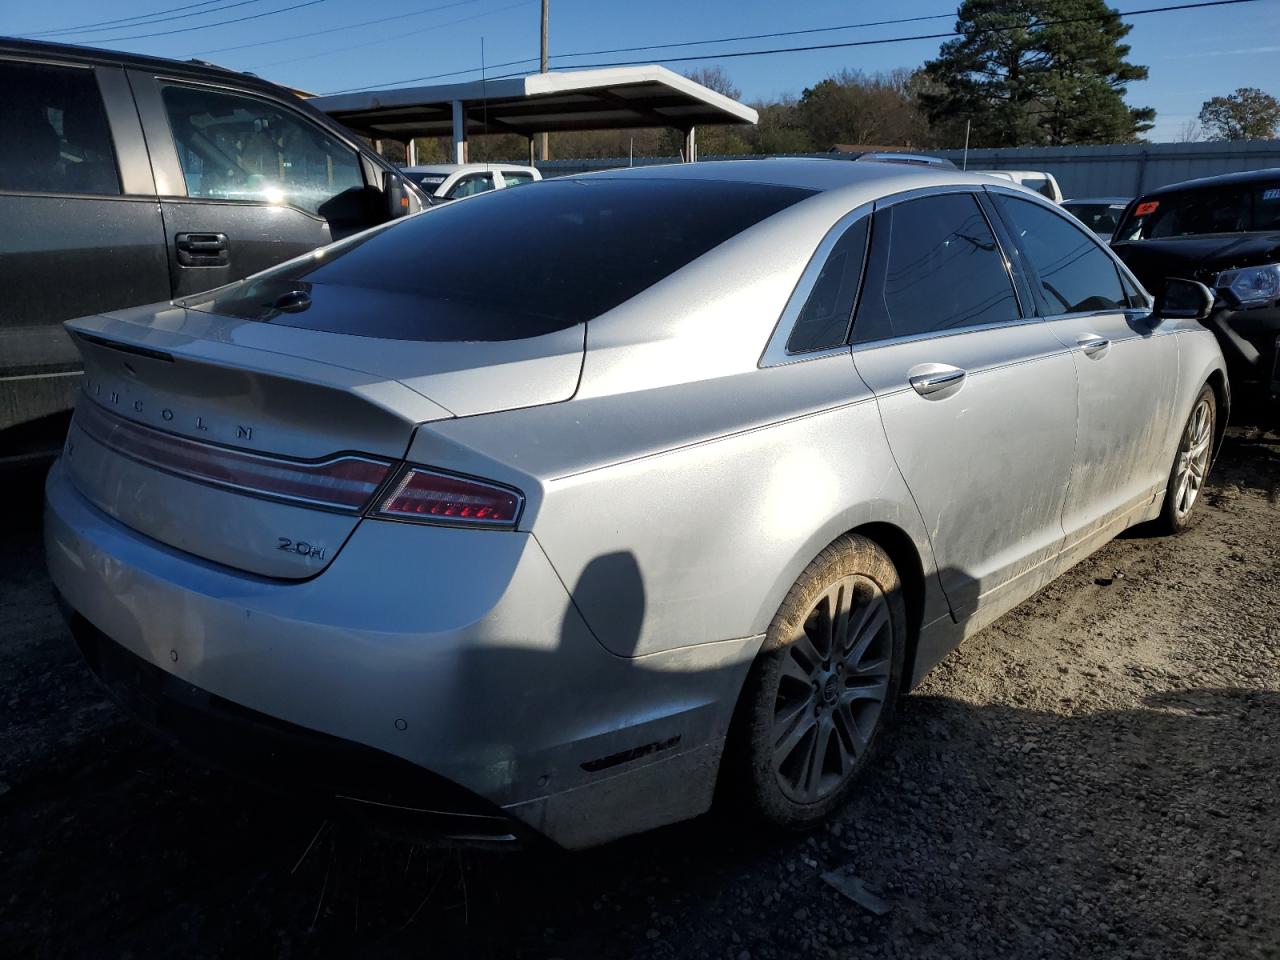 3LN6L2LUXDR812550  - LINCOLN MKZ  2013 IMG - 2